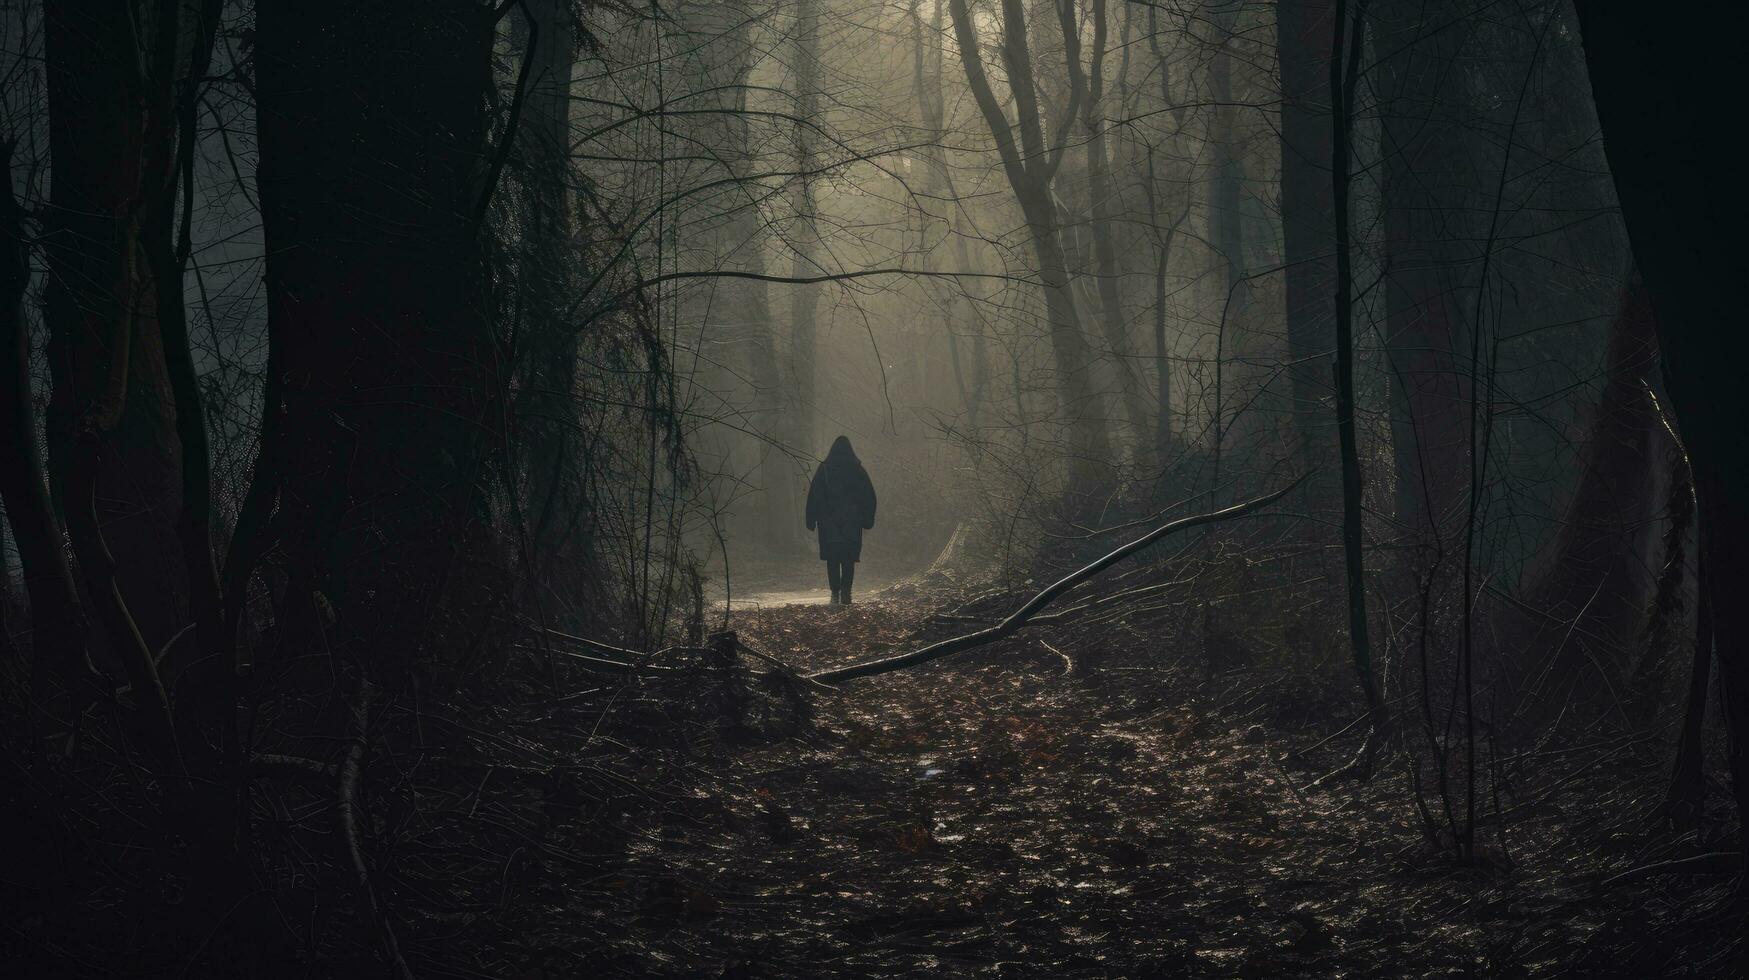 Mysterious figure facing away watching path in eerie forest Winter day Grungy textured edit photo